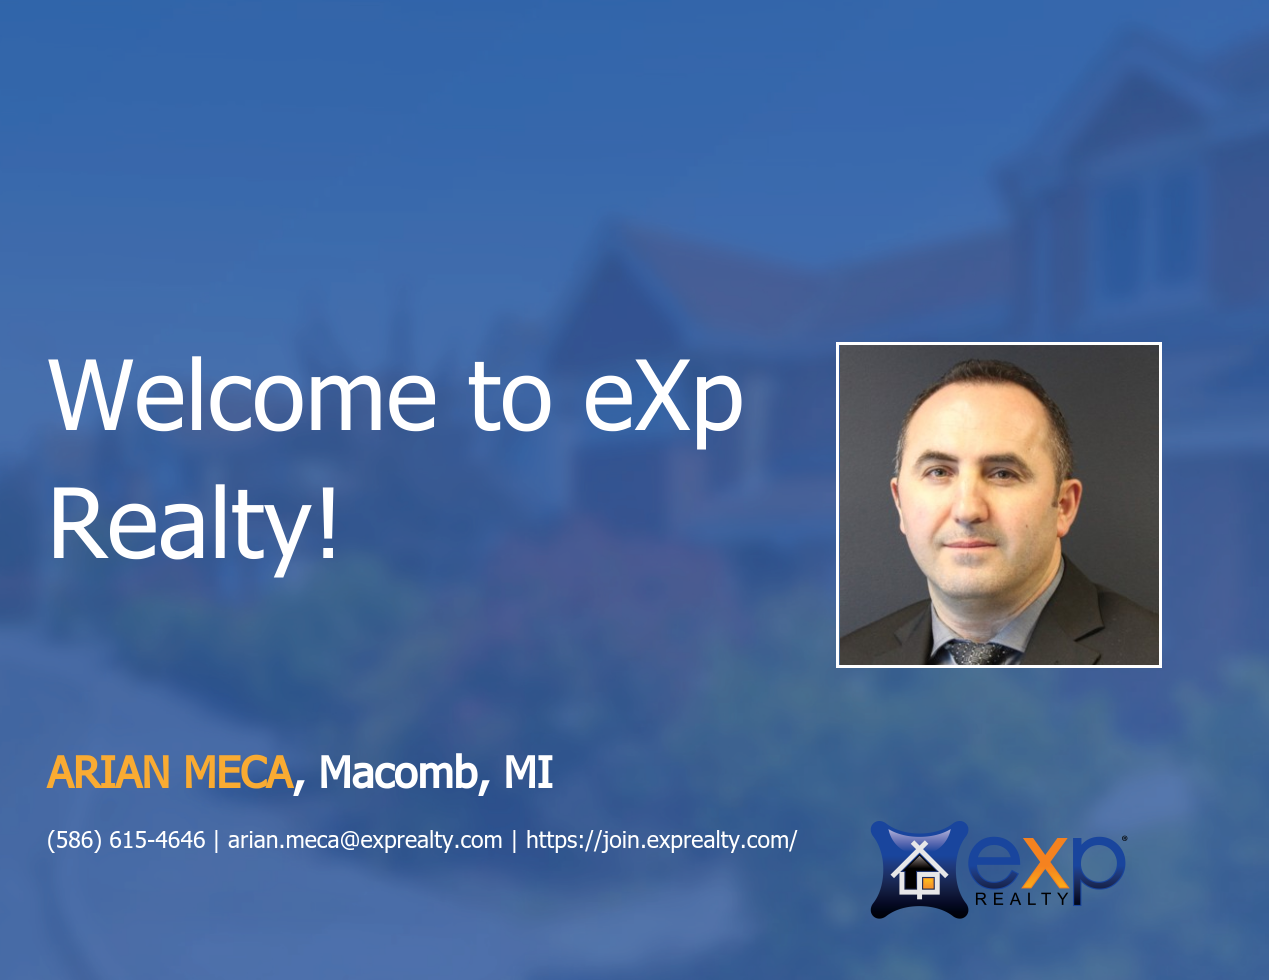 eXp Realty Welcomes Arian Meca!